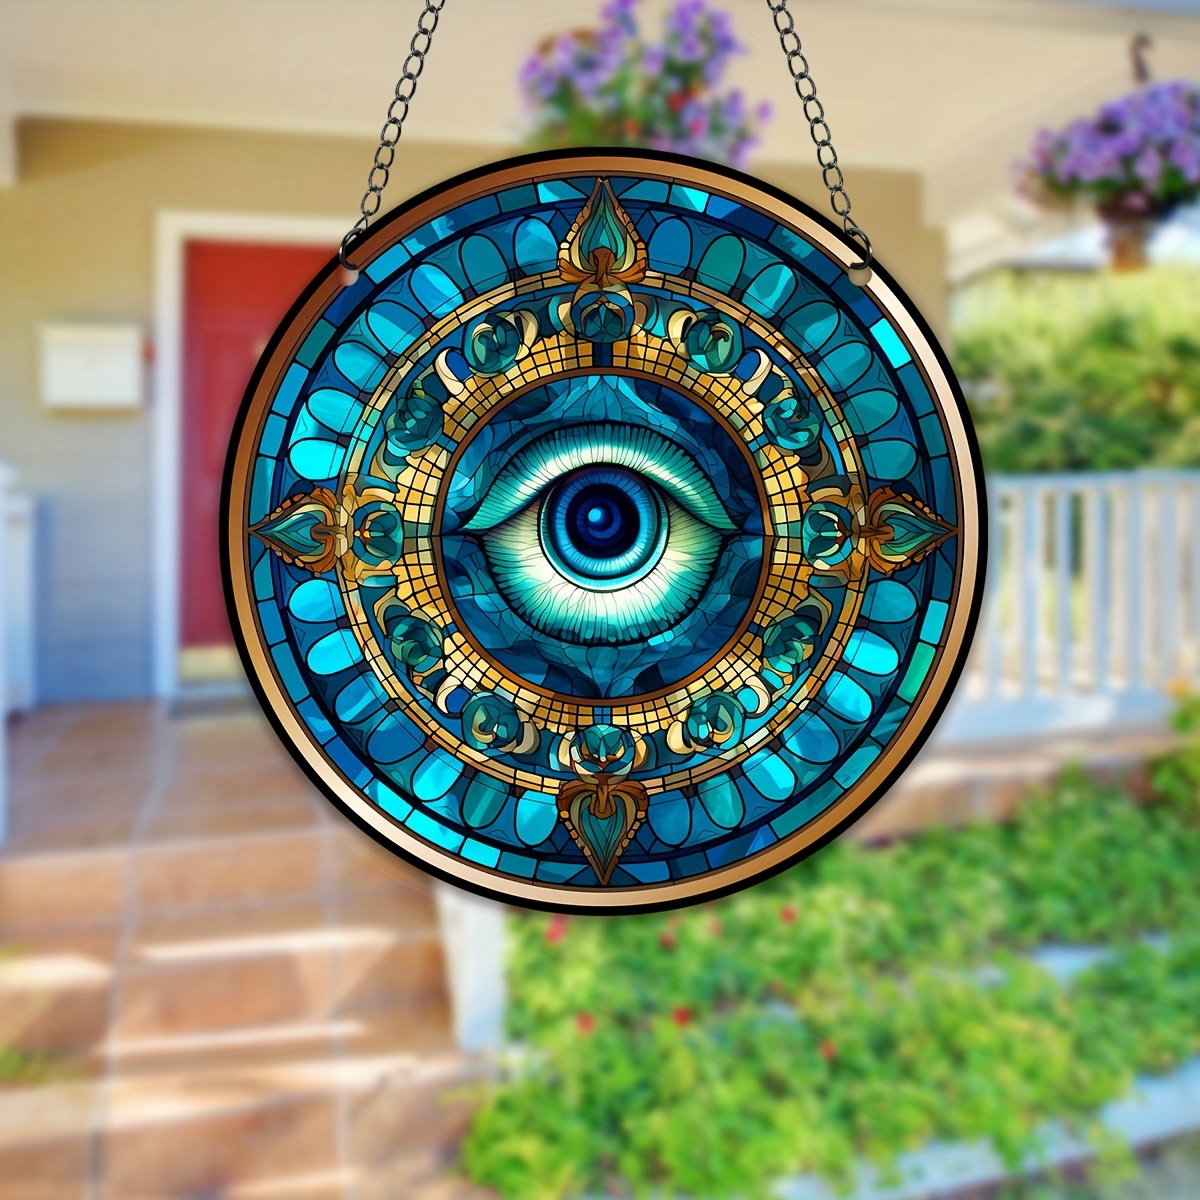 How To Bless and Dress Evil Eye Talismans